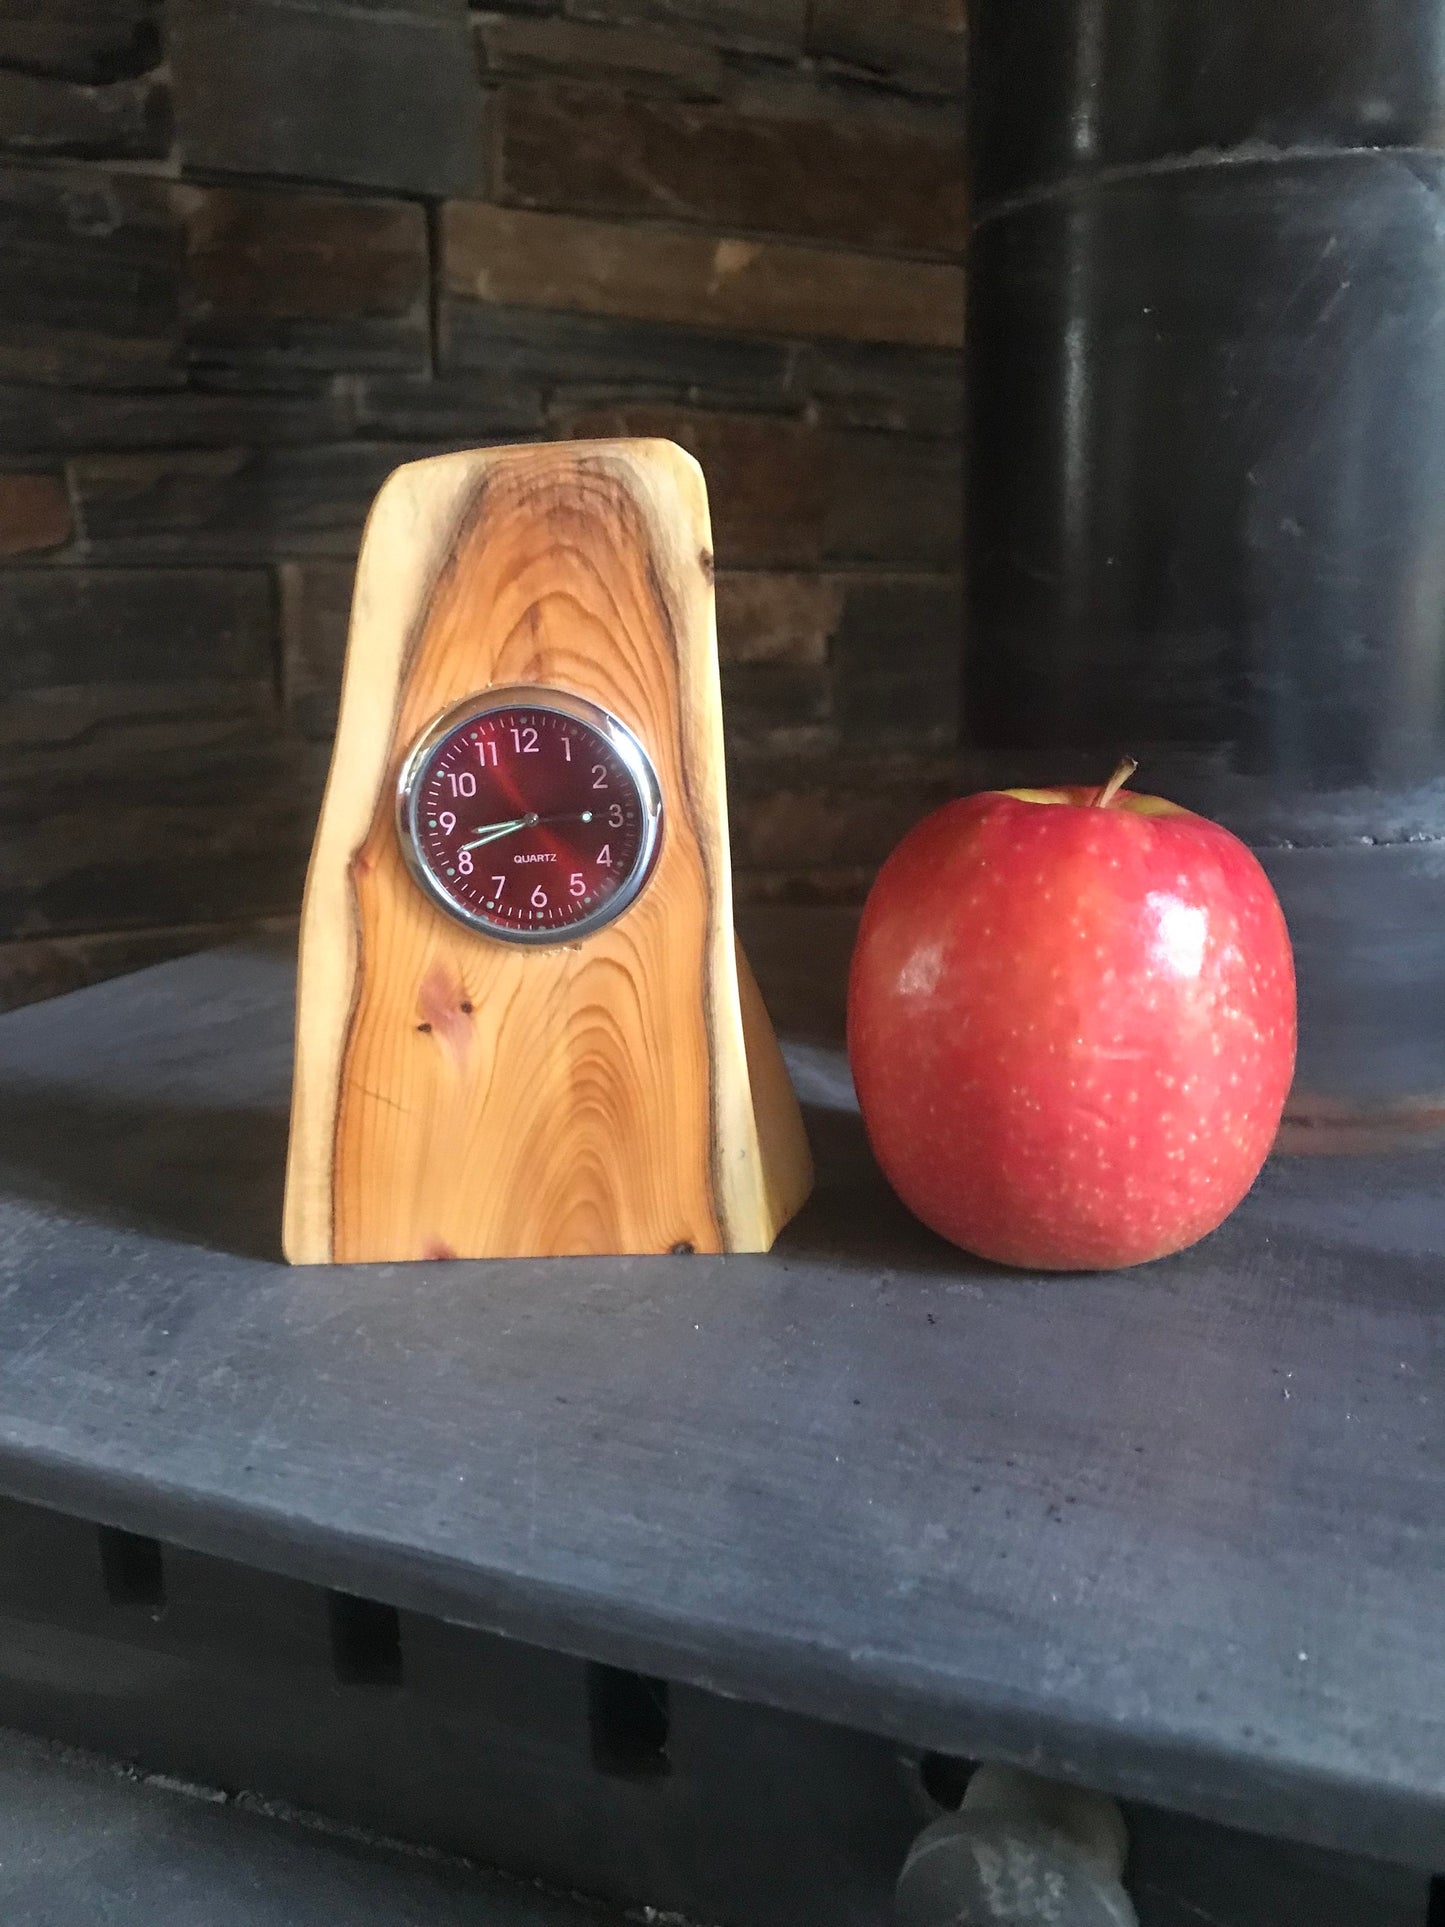 Handmade miniature clock in yew in unique design. There is a choice of 6 different clock face colours